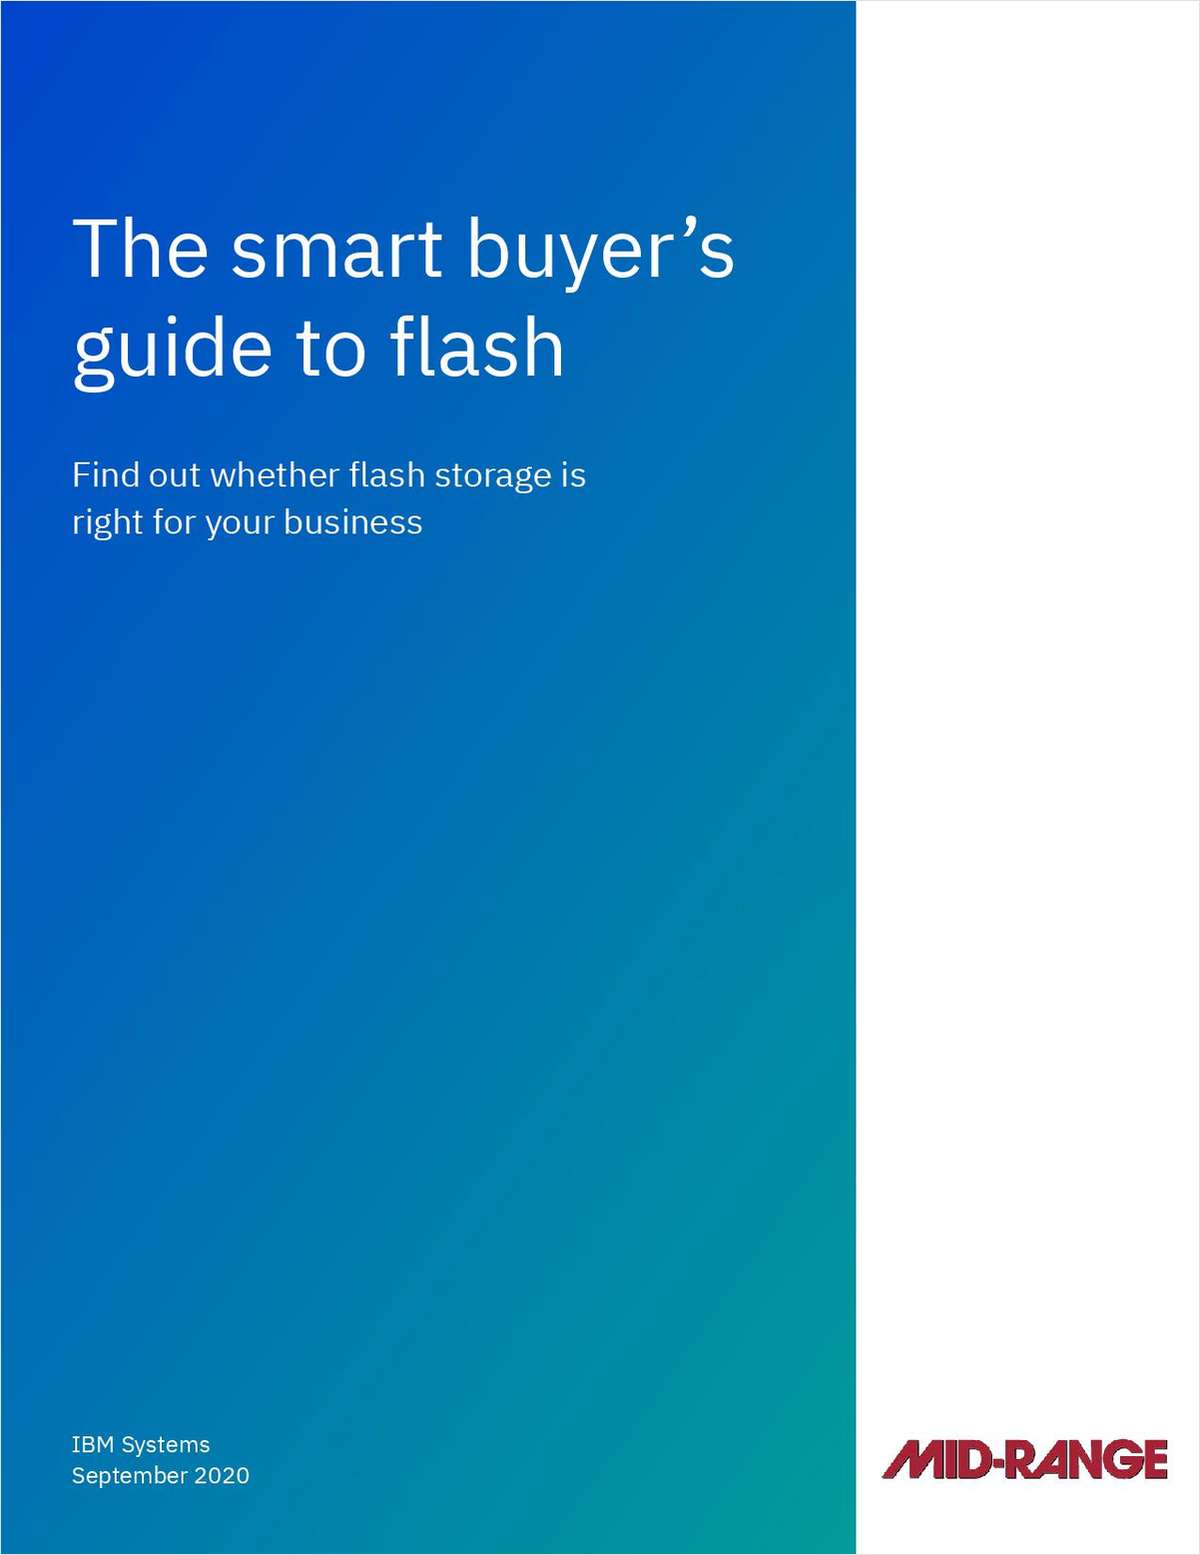 The smart buyer's guide to flash